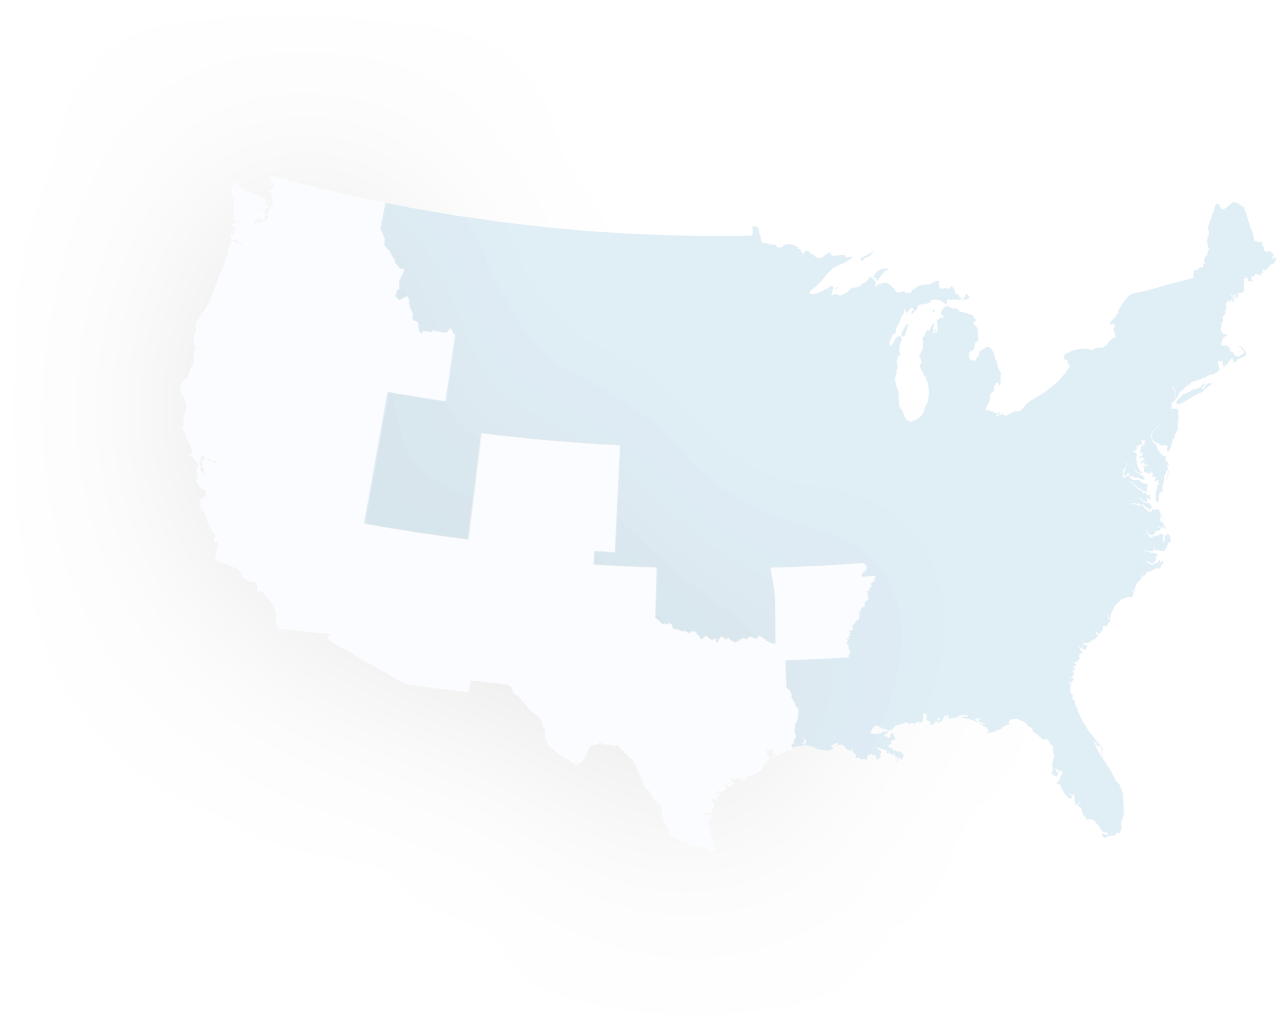 Image of United States with ten states where firm operates highlighted.